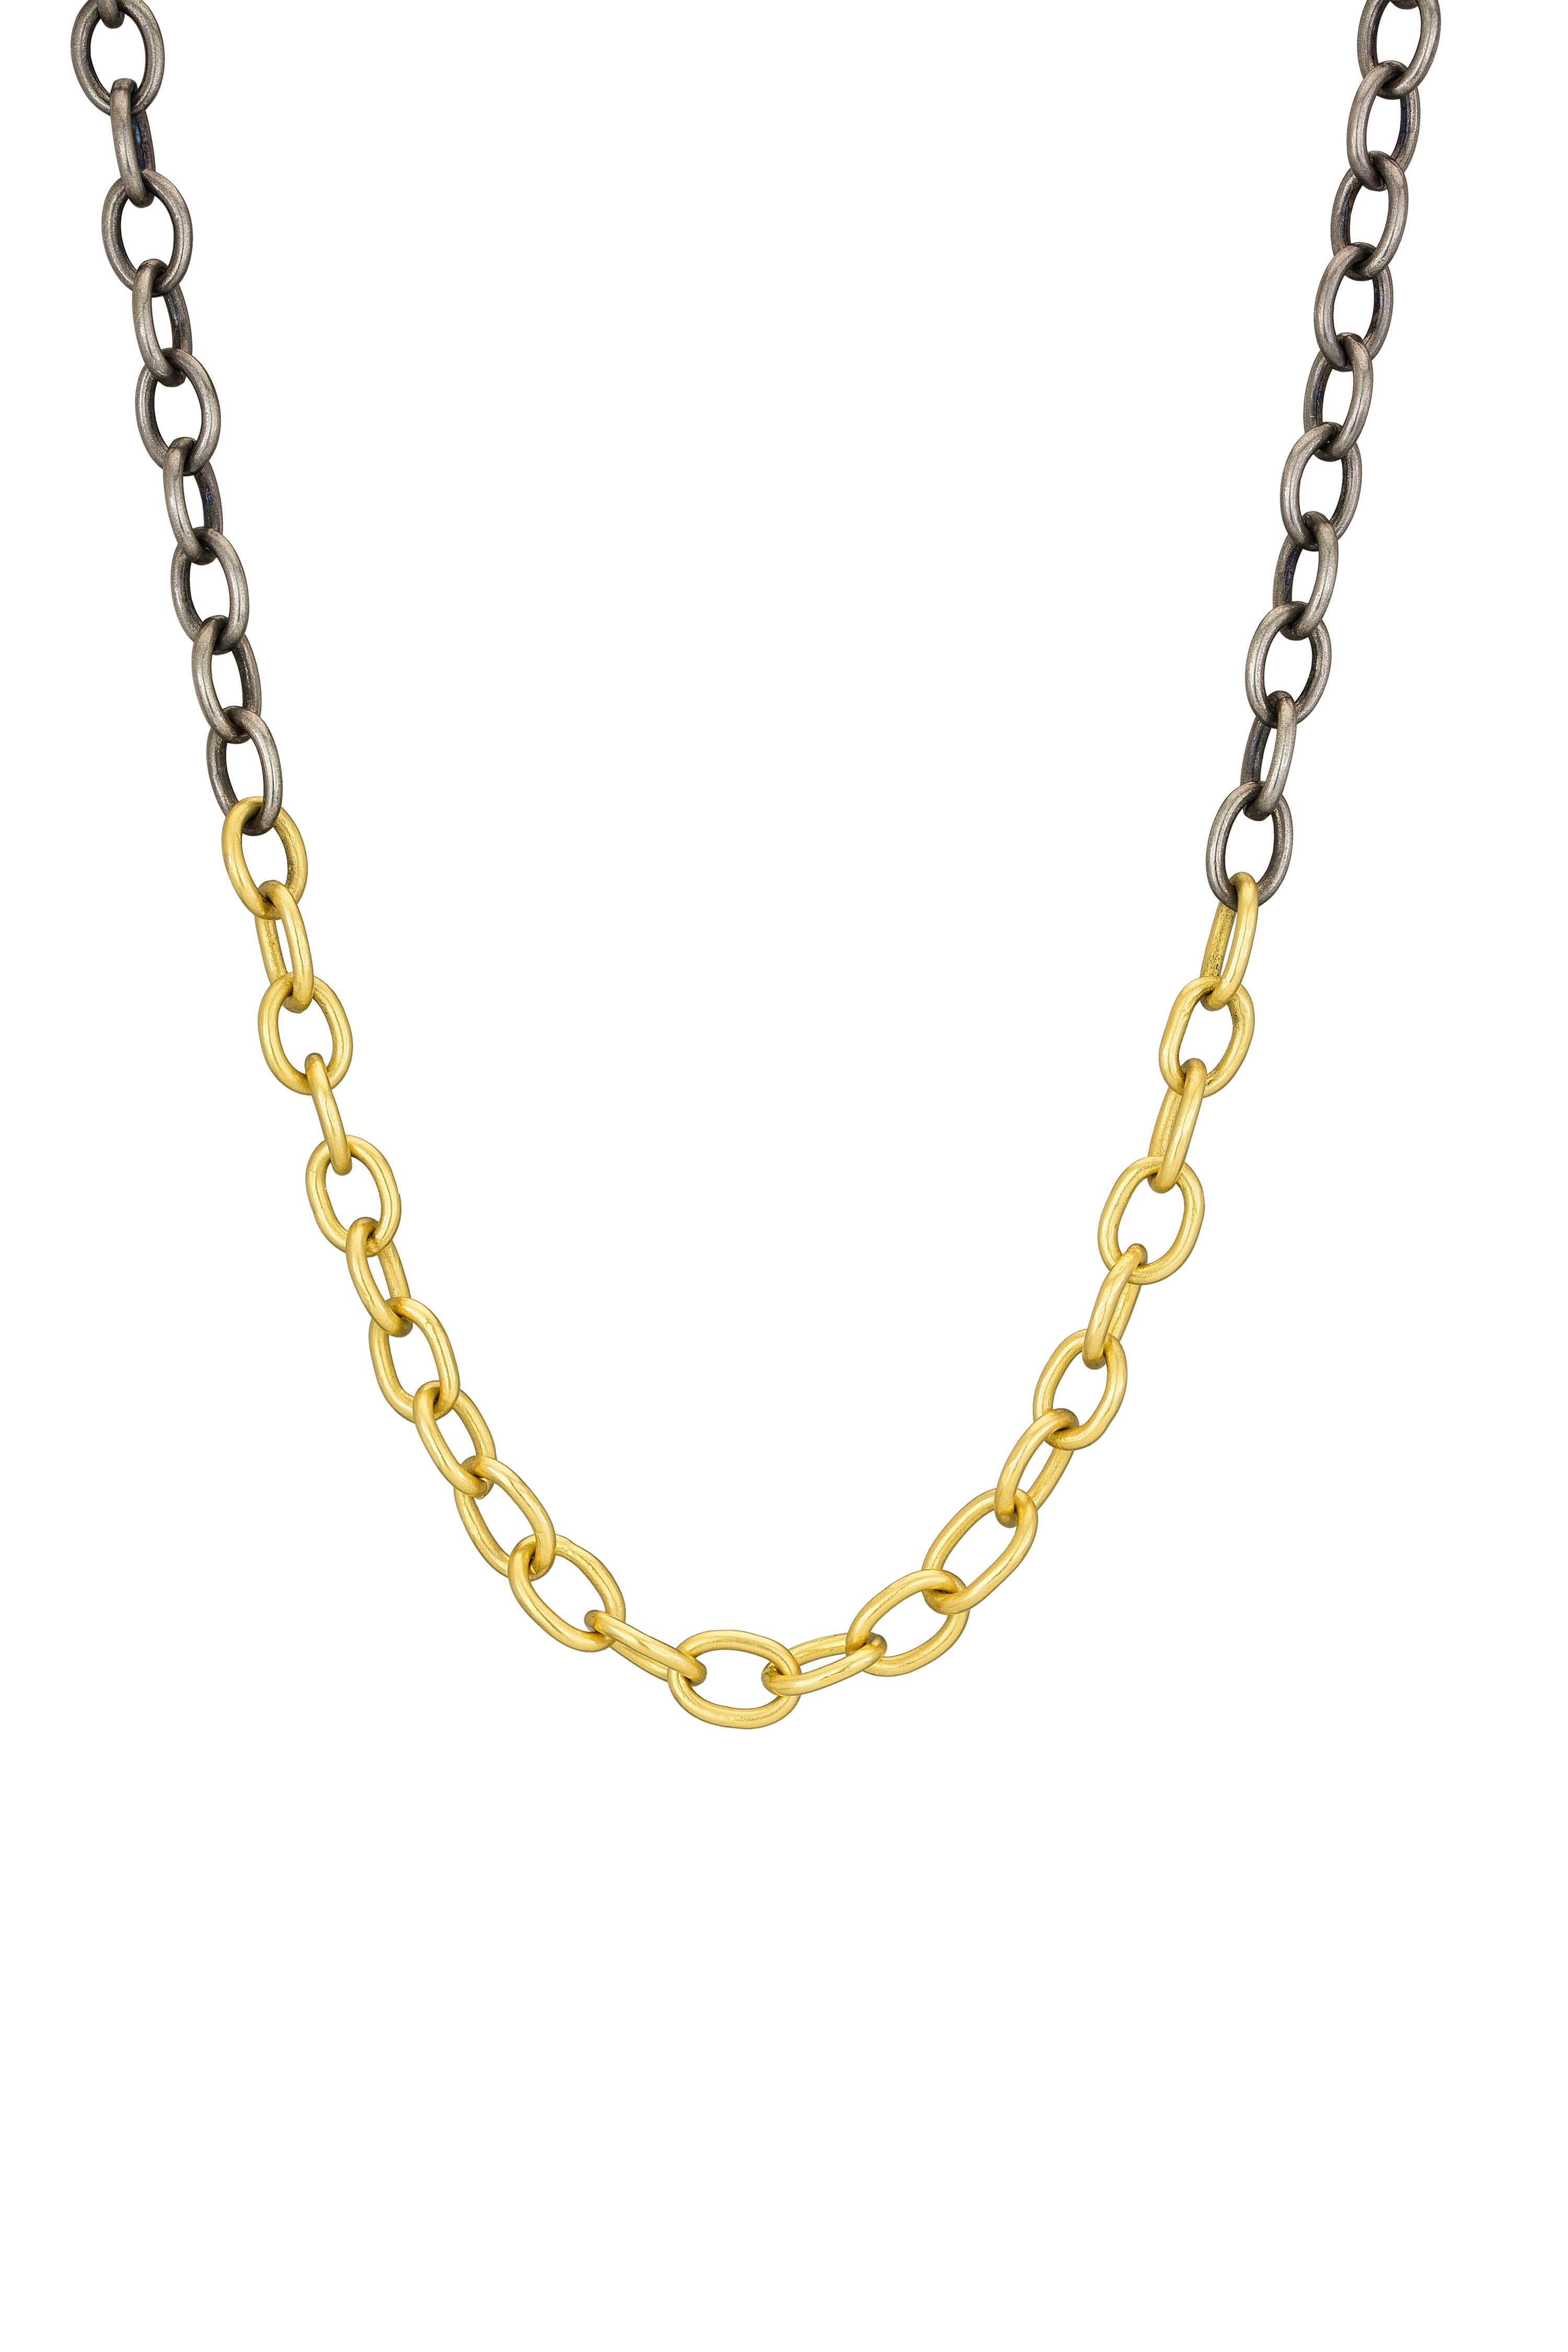 Stephanie Albertson handcrafted 22K gold, rhodium blackened silver oval link chain. Our best selling mixed metal chain is a must have in your jewelry wardrobe. At 34